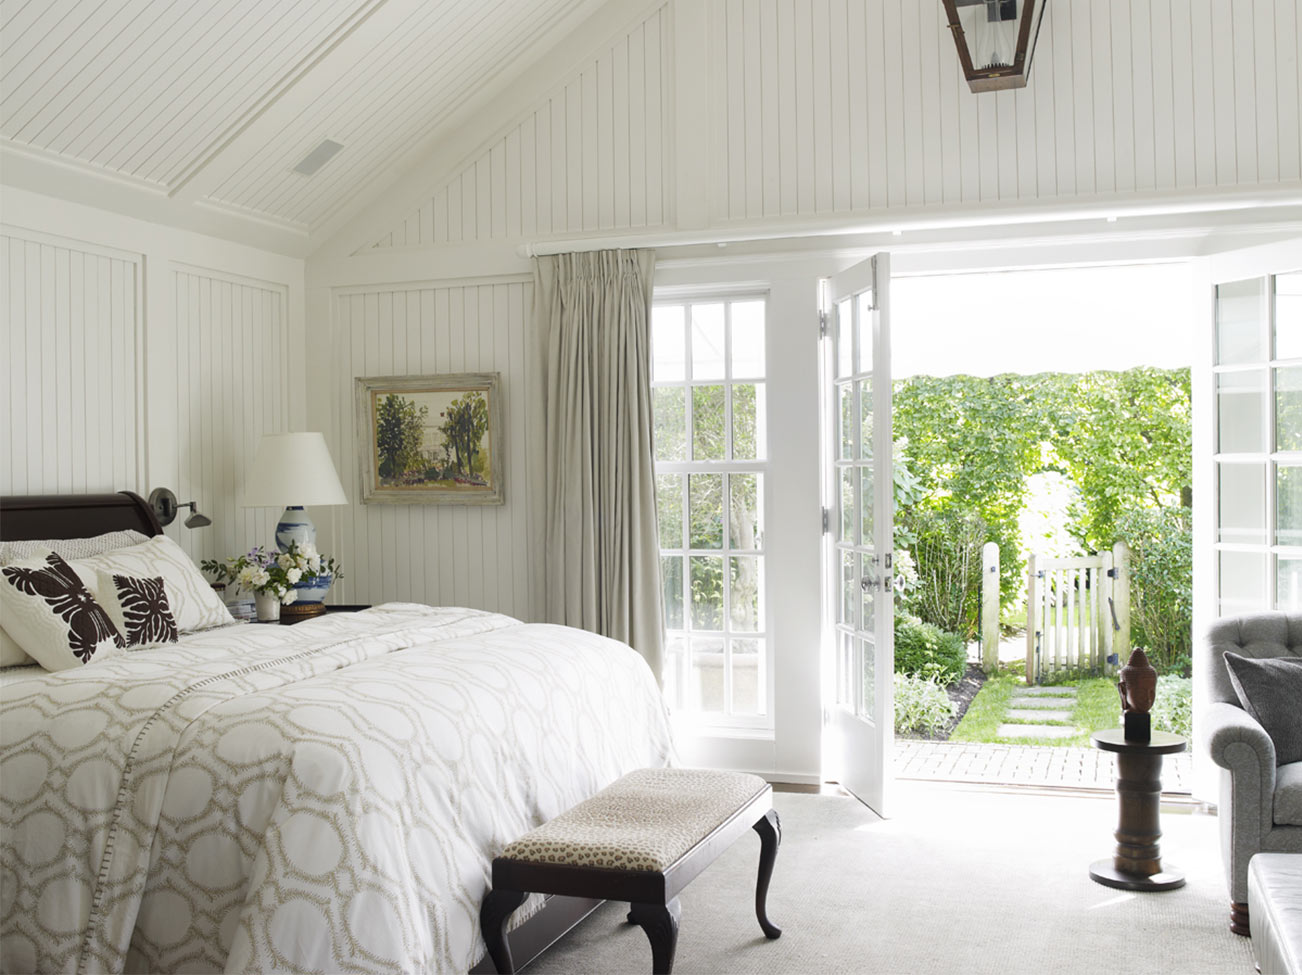 Bedroom with white beadboard throughout, elegant bedding and bedroom bench, gray arm chair and French doors open to a garden.